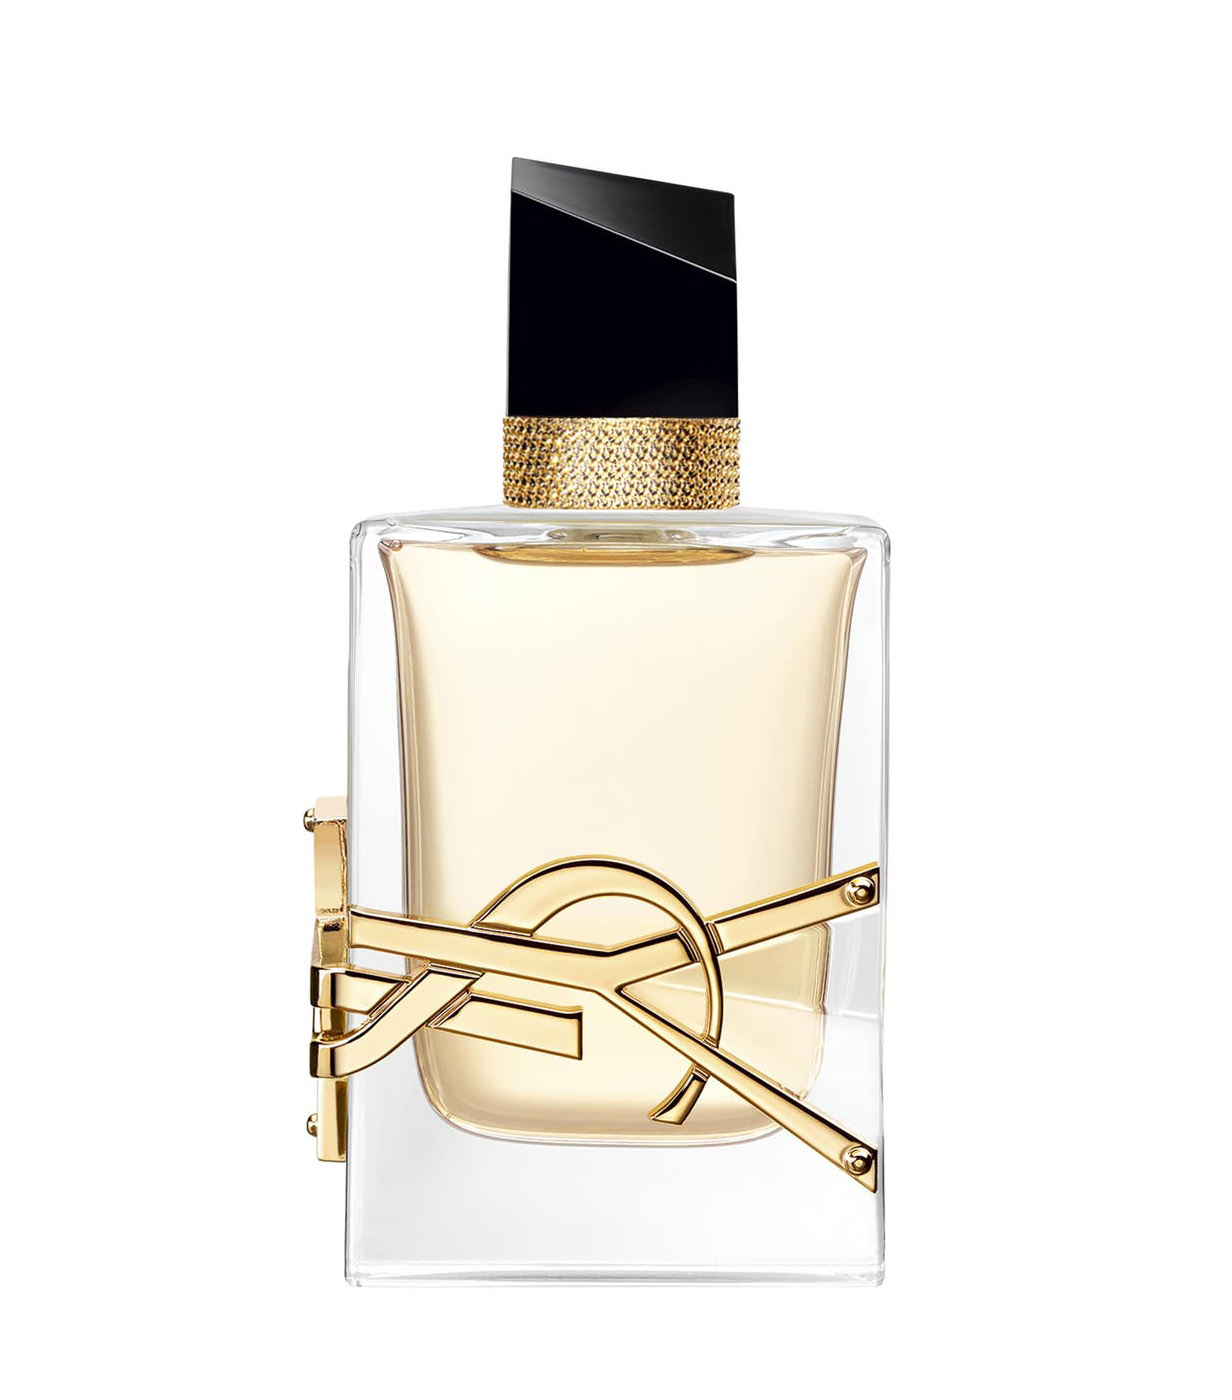 25 Prettiest Perfume Bottles That Deserve A Spot On Your Table